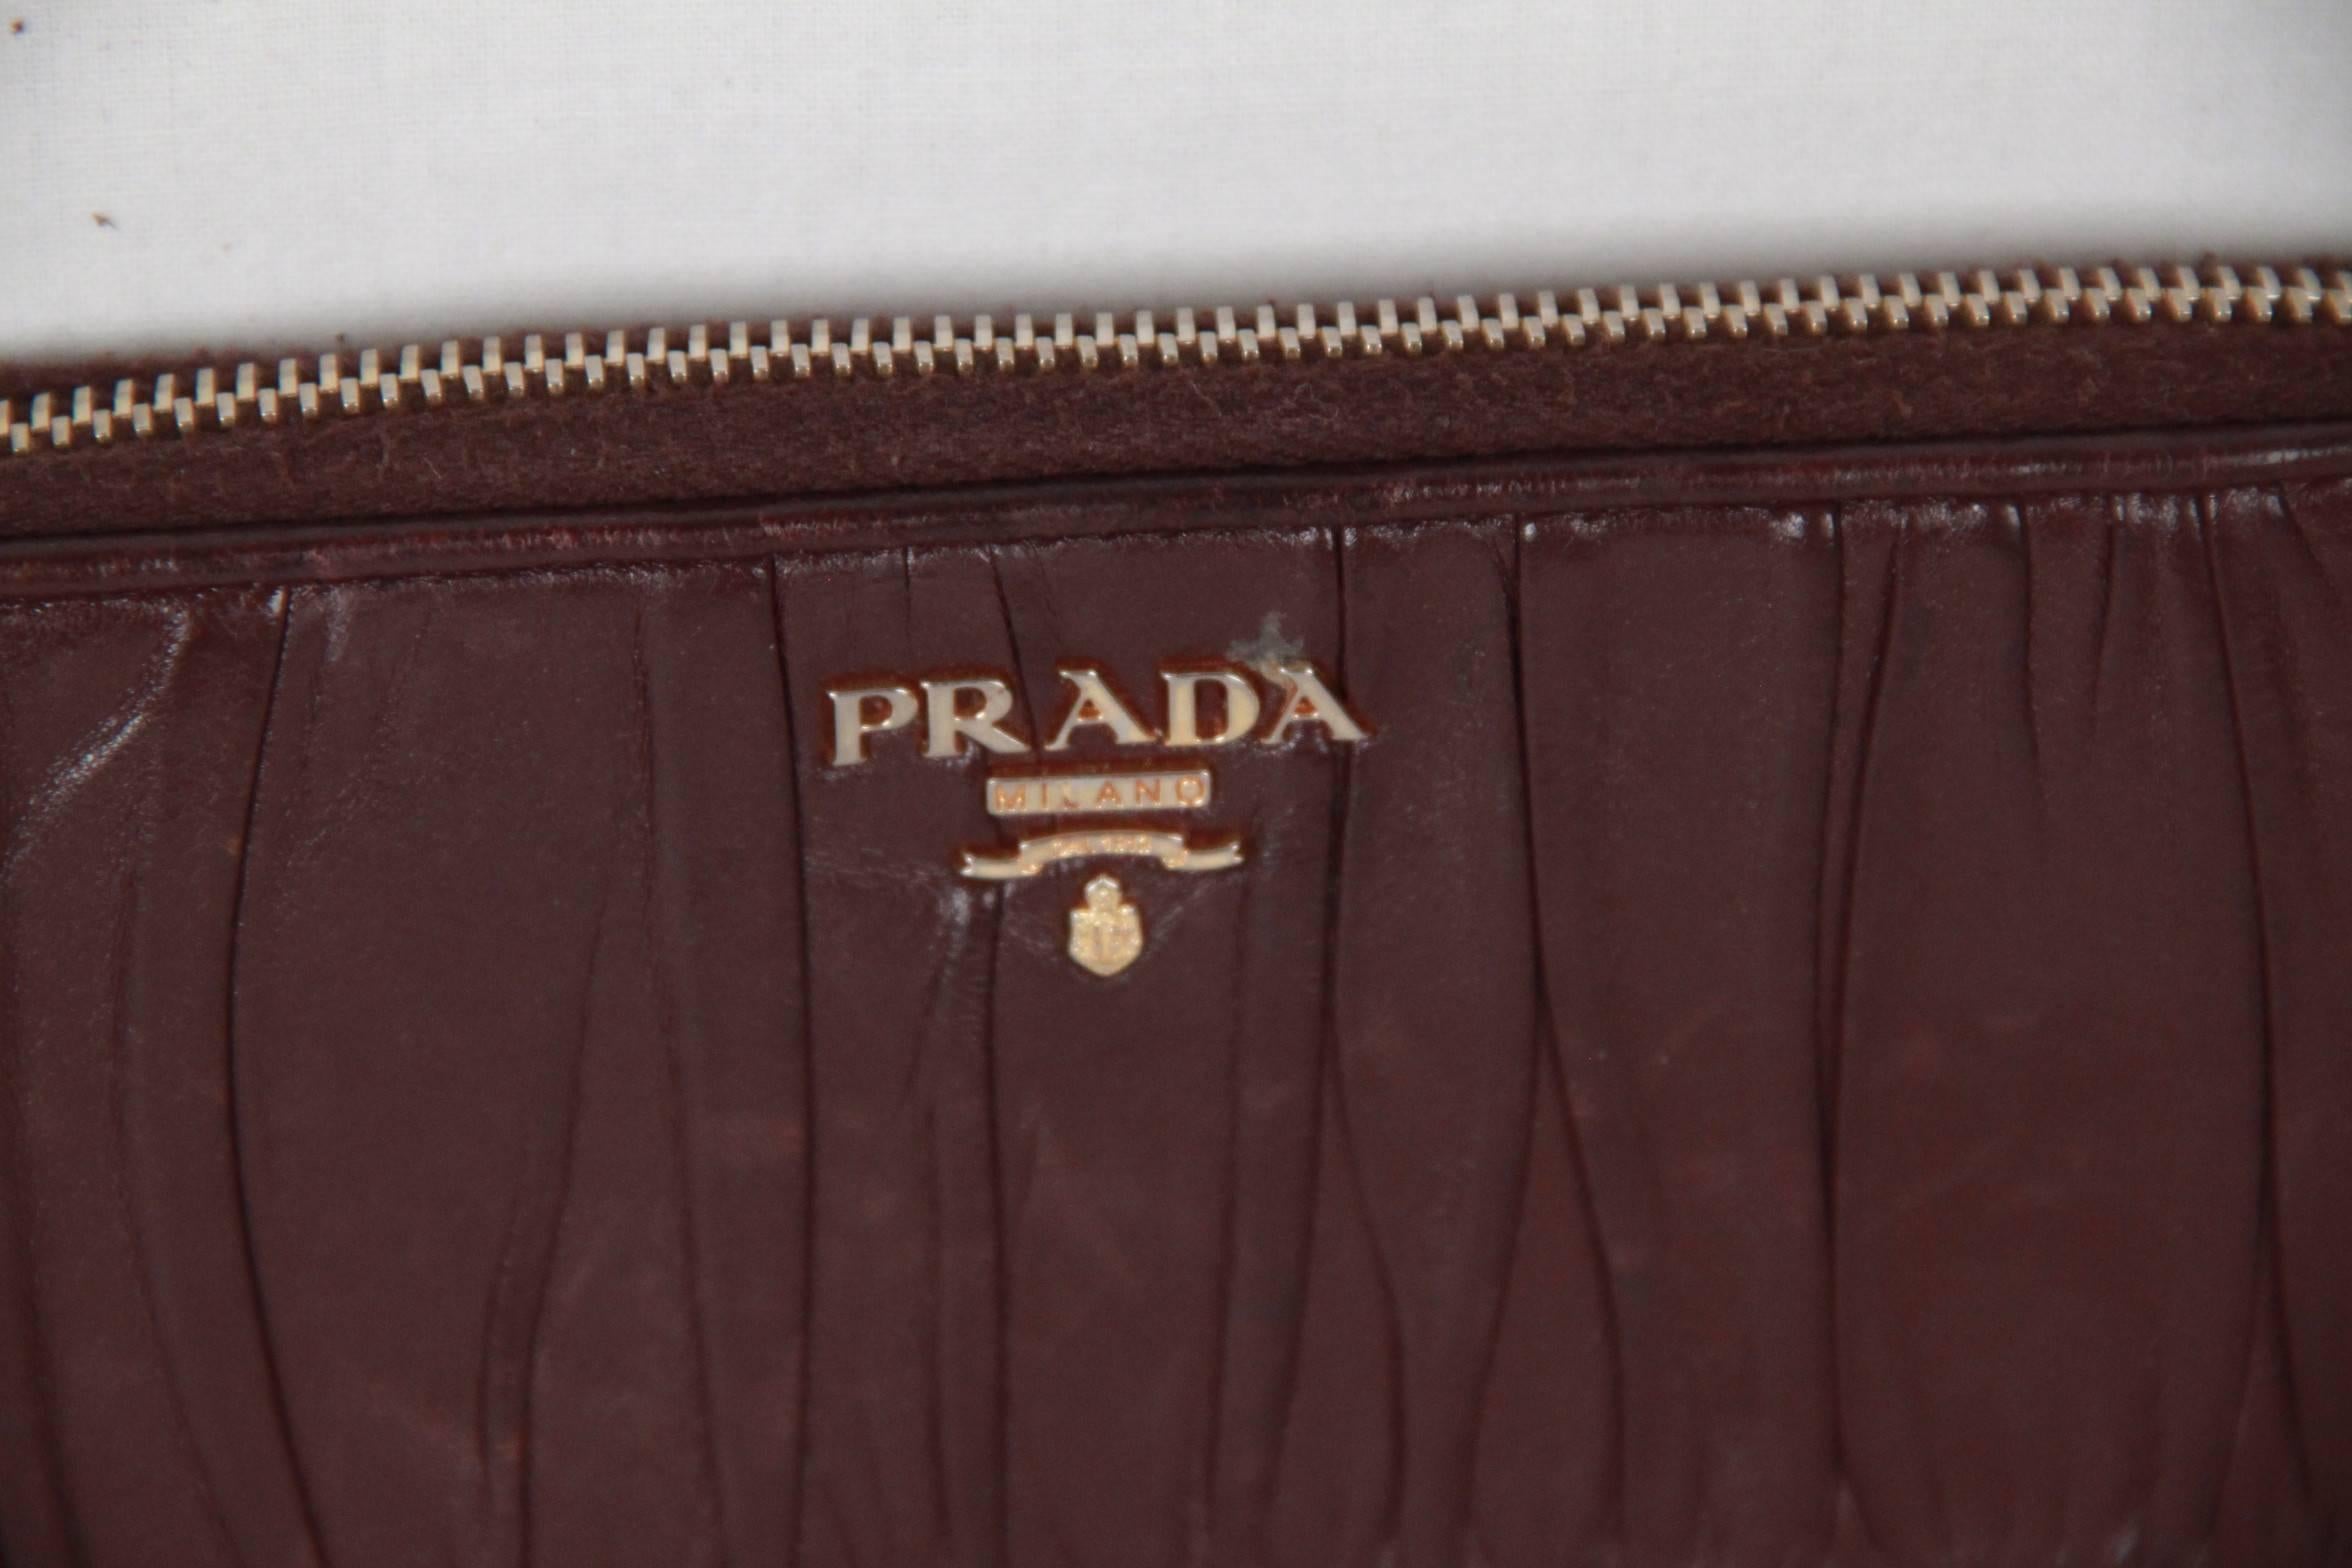 Prada 'Nappa Gaufre' zip around wallet with gold plated hardware. Ruched lambskin with PRADA logo lettering. Zipper closure. 1 coin compartment with zip closure. Eight credit card slots. Two billfold compartments. Made in Italy

Logos & tags: